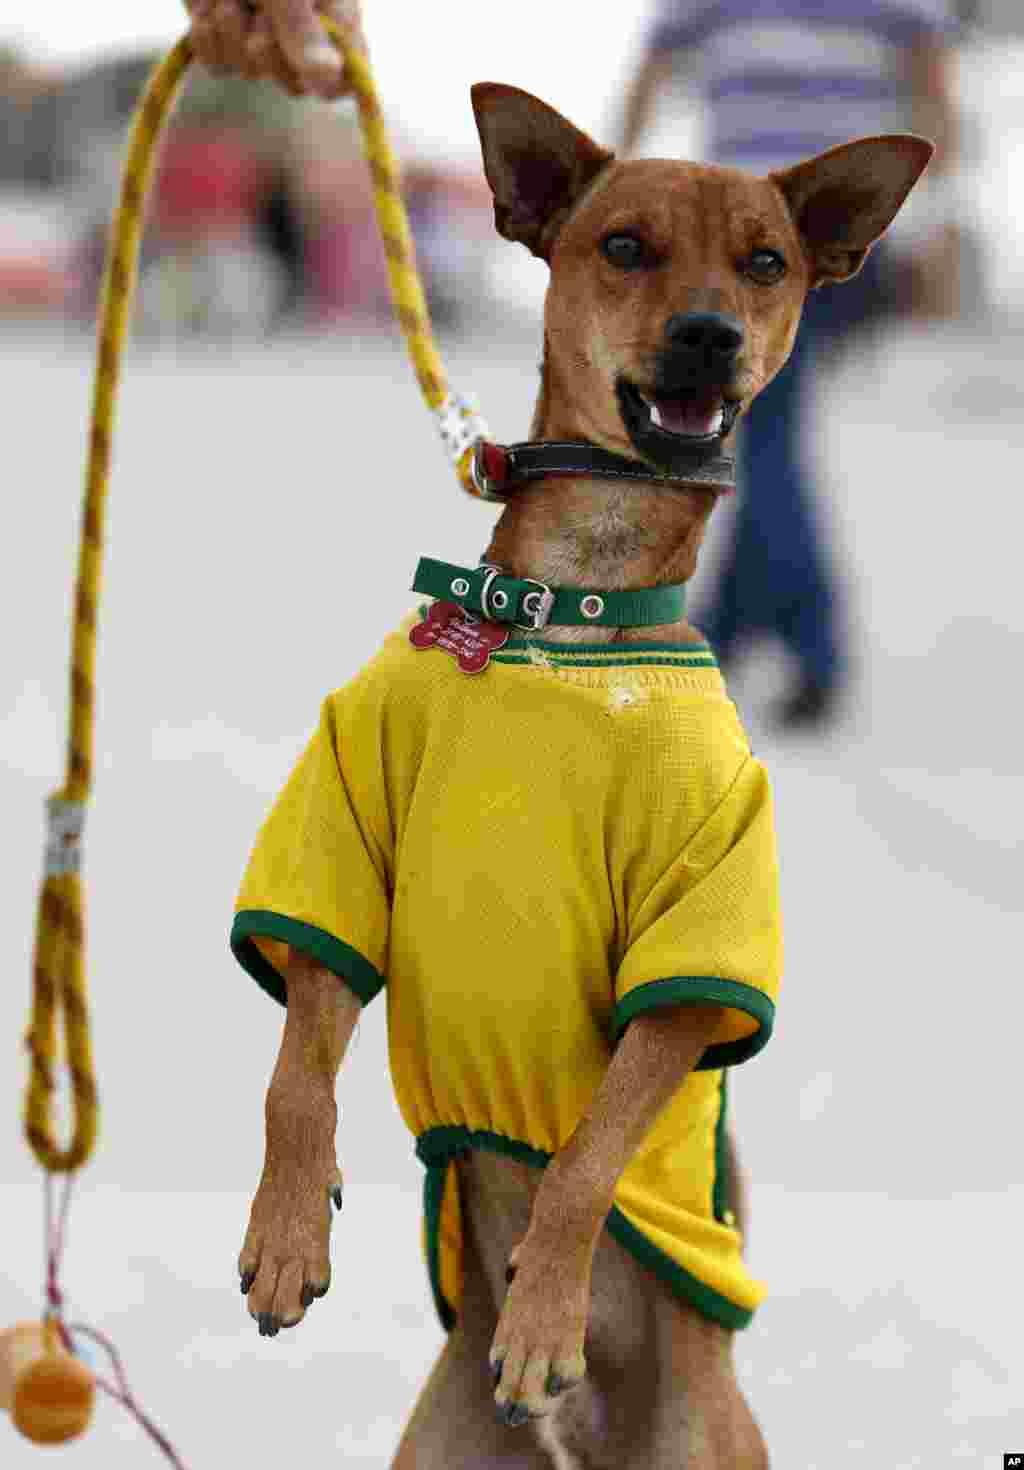 A dog wears a jersey in the colors of Brazil's soccer team outside Arena Corinthians in Sao Paulo, Brazil, June 7, 2014.